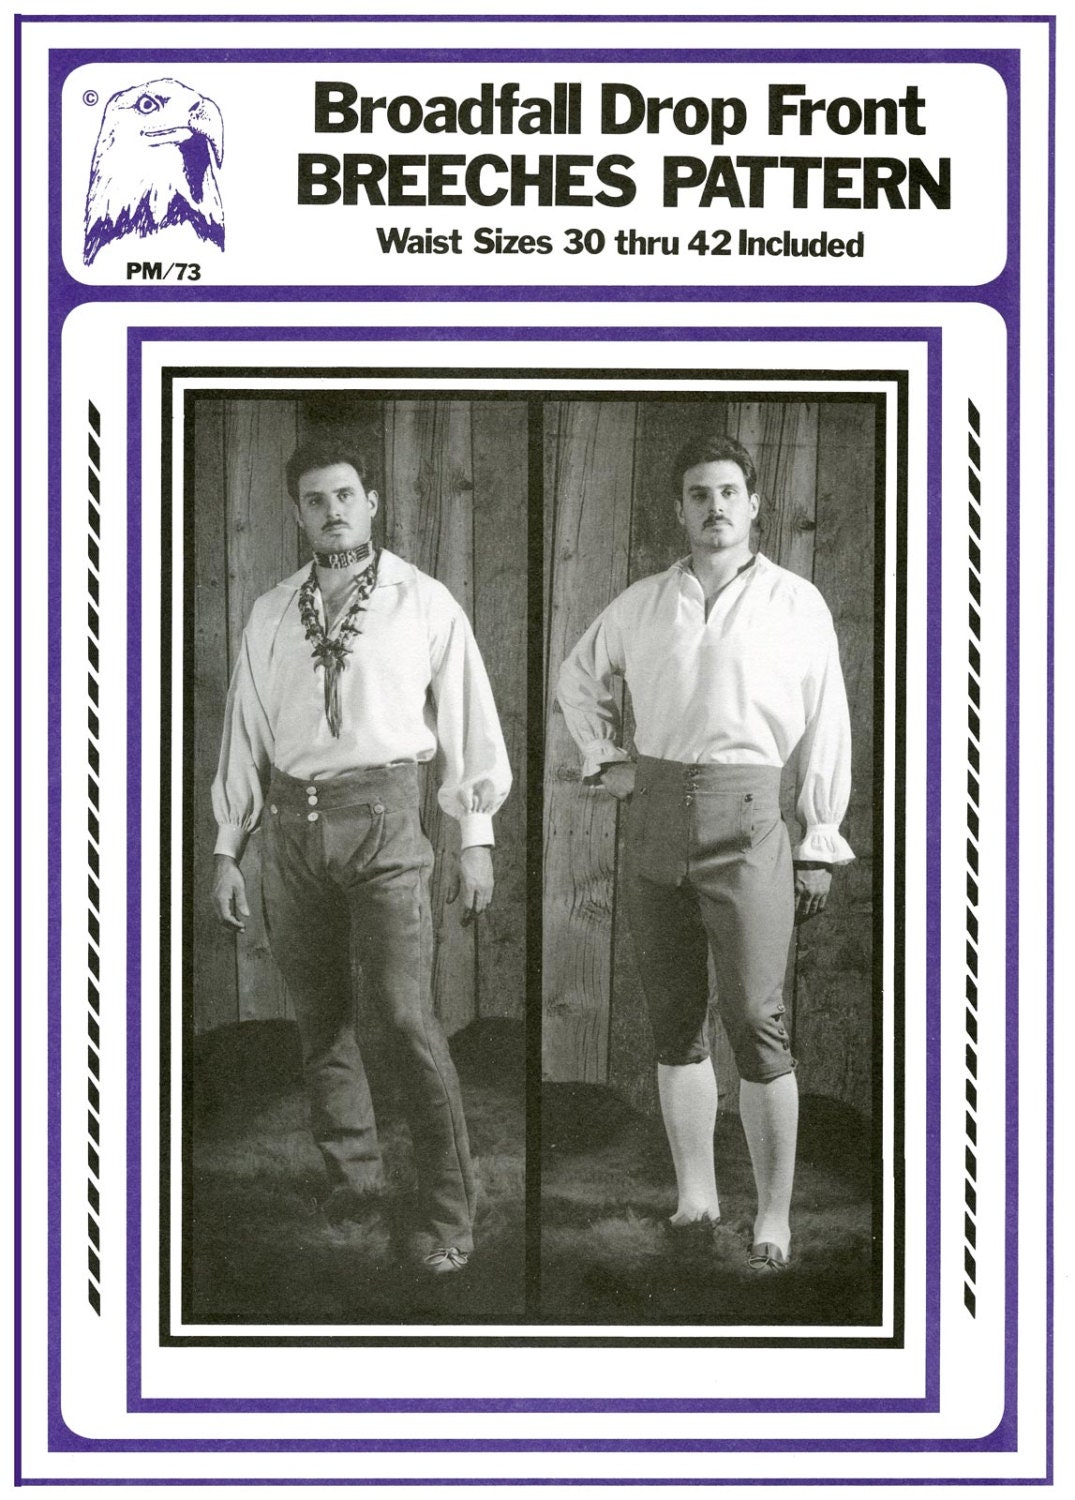 Men&#39;s Broadfall Drop Front Breeches &amp; Pants Waist 30-42 - Eagle&#39;s View Sewing Pattern # 73